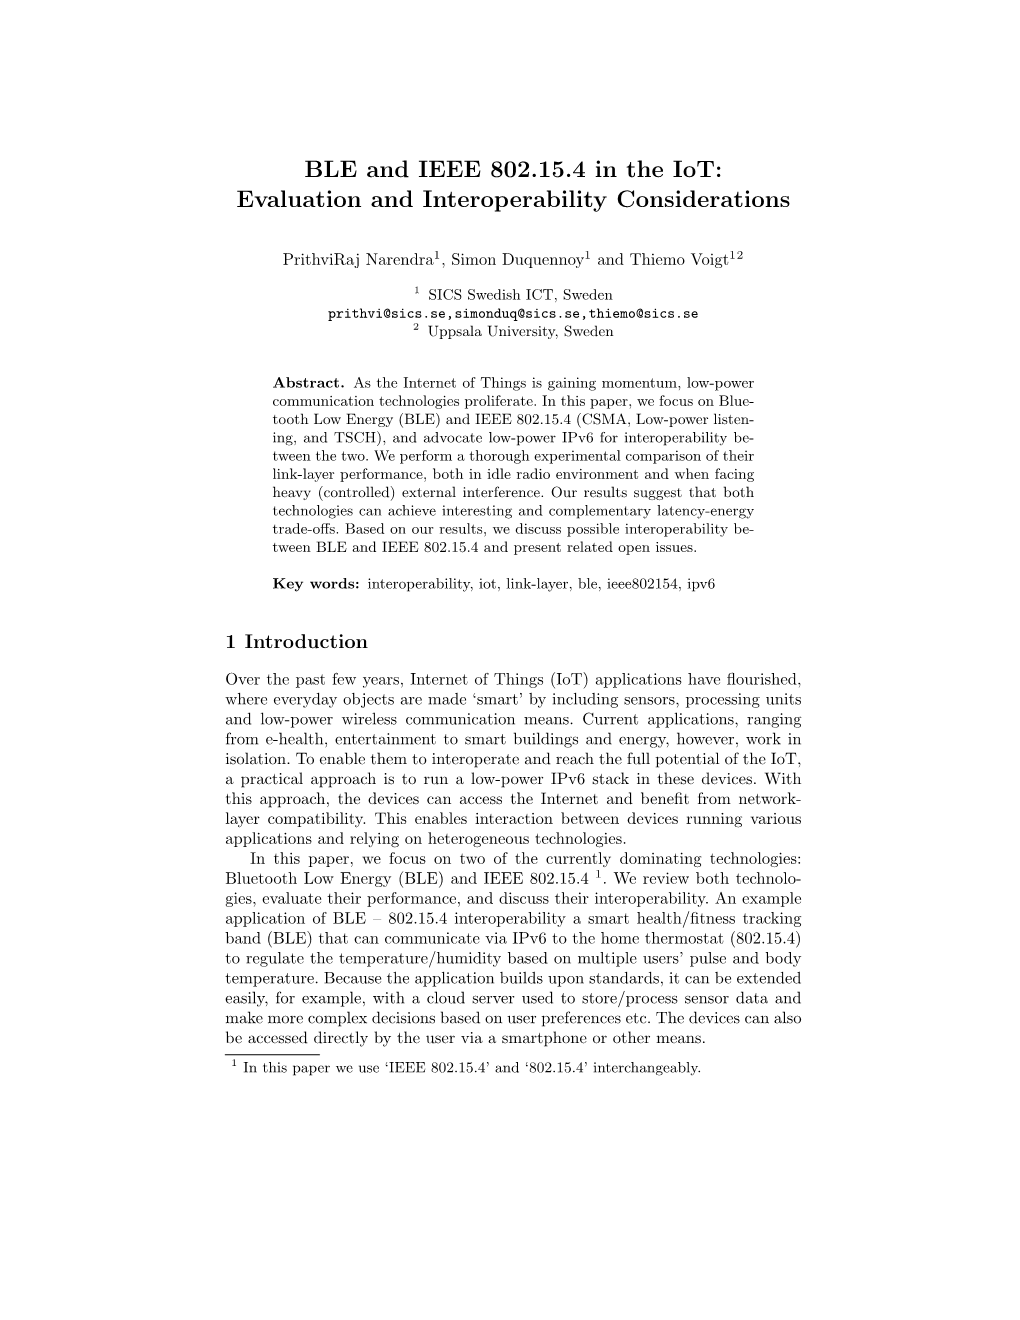 BLE and IEEE 802.15.4 in the Iot: Evaluation and Interoperability Considerations